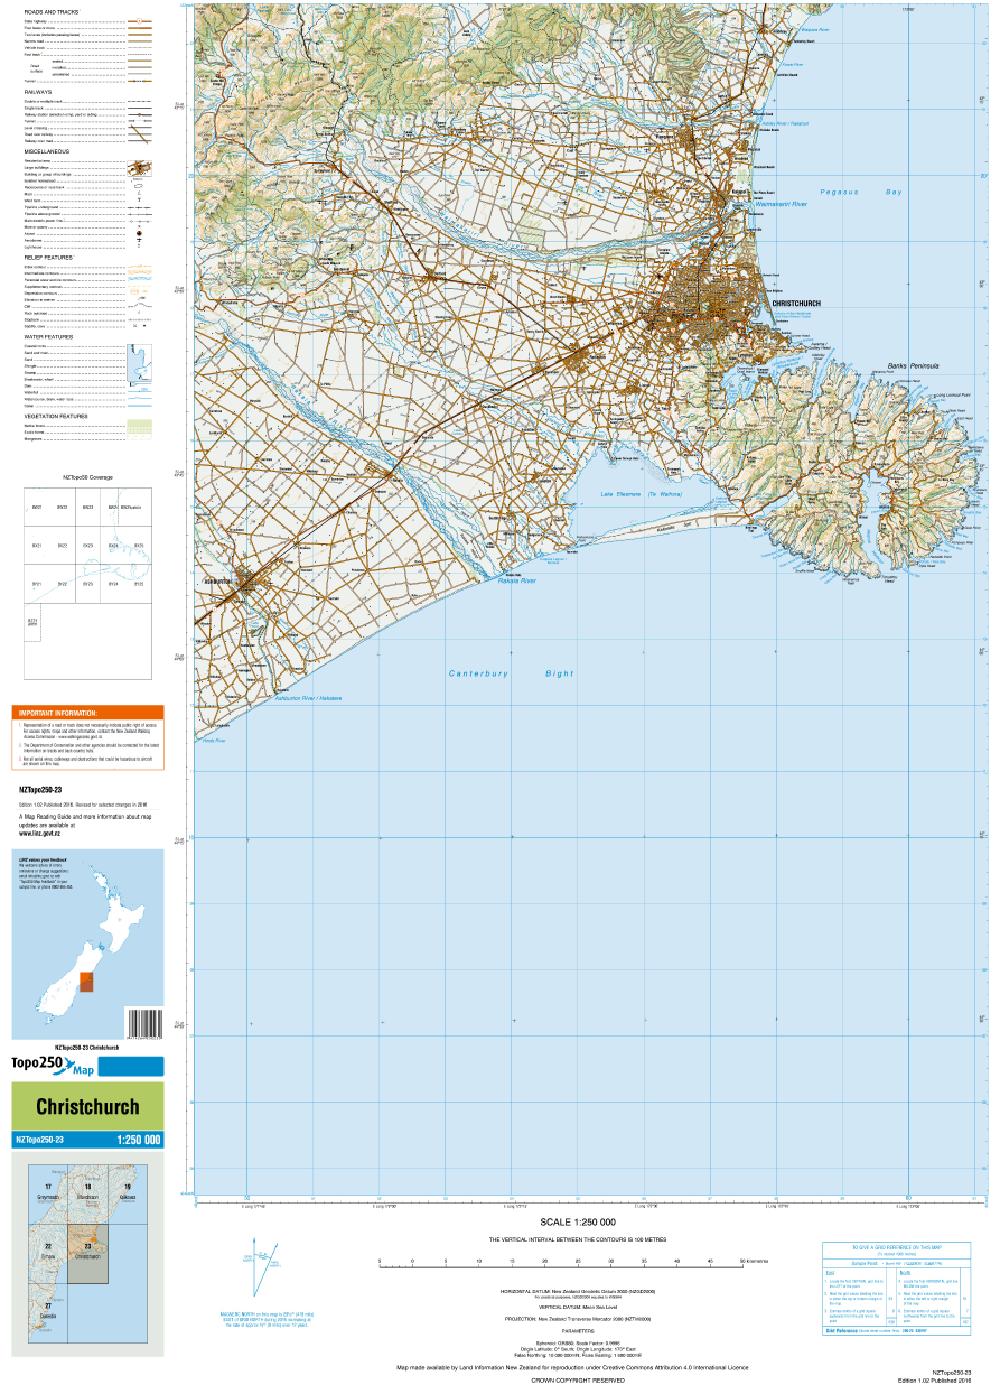 Topo map of Christchurch